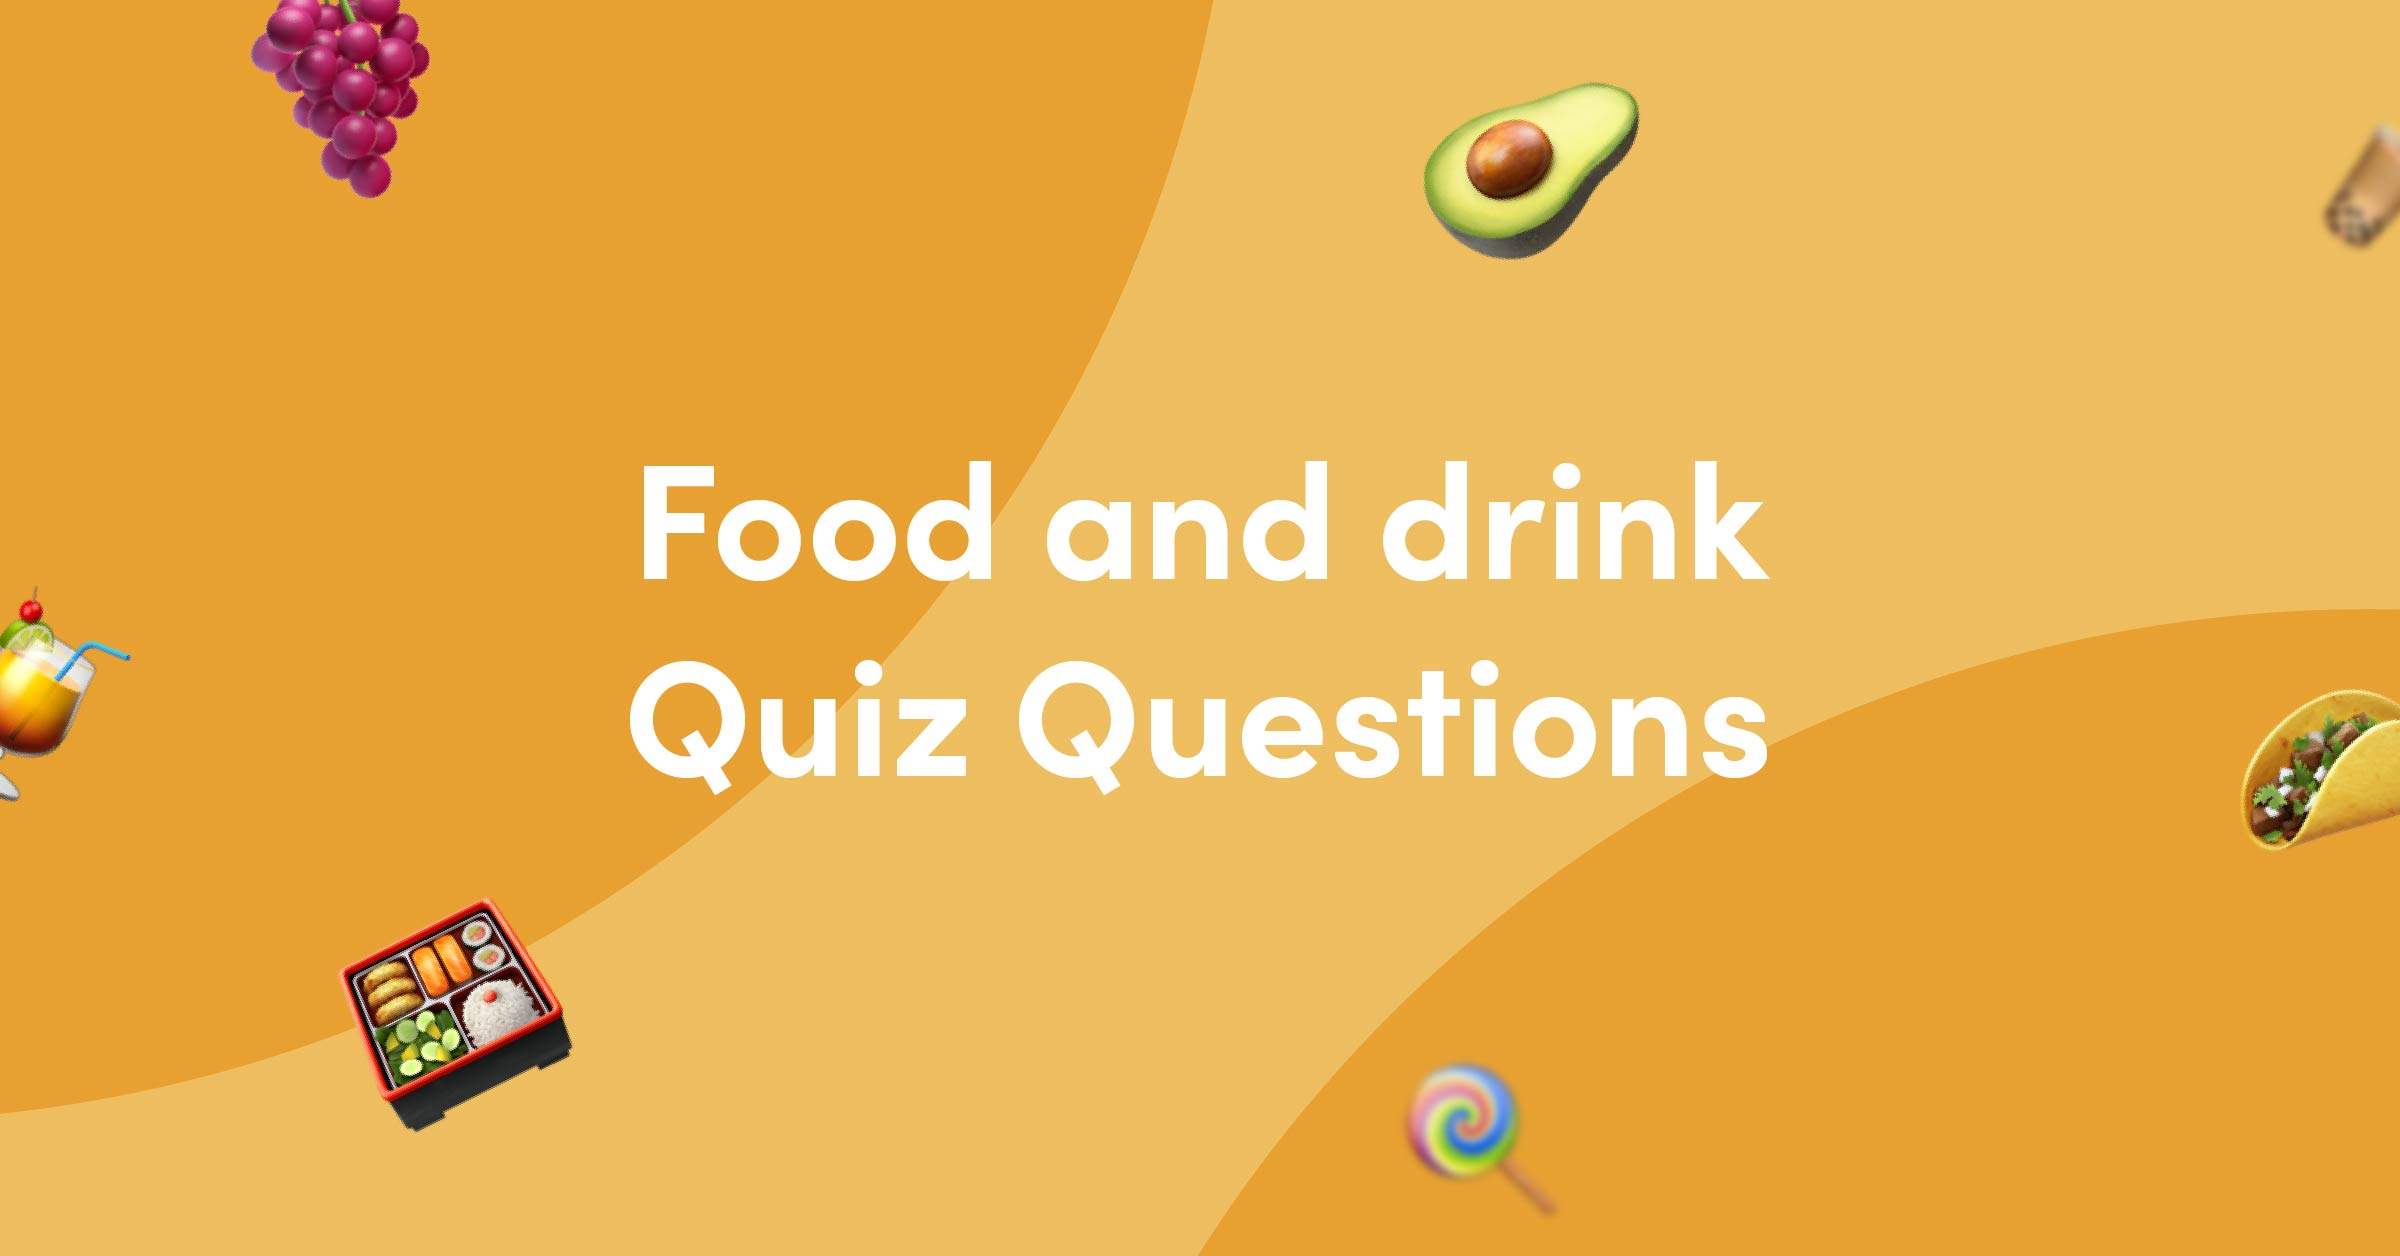 Food and drink quiz questions and answers